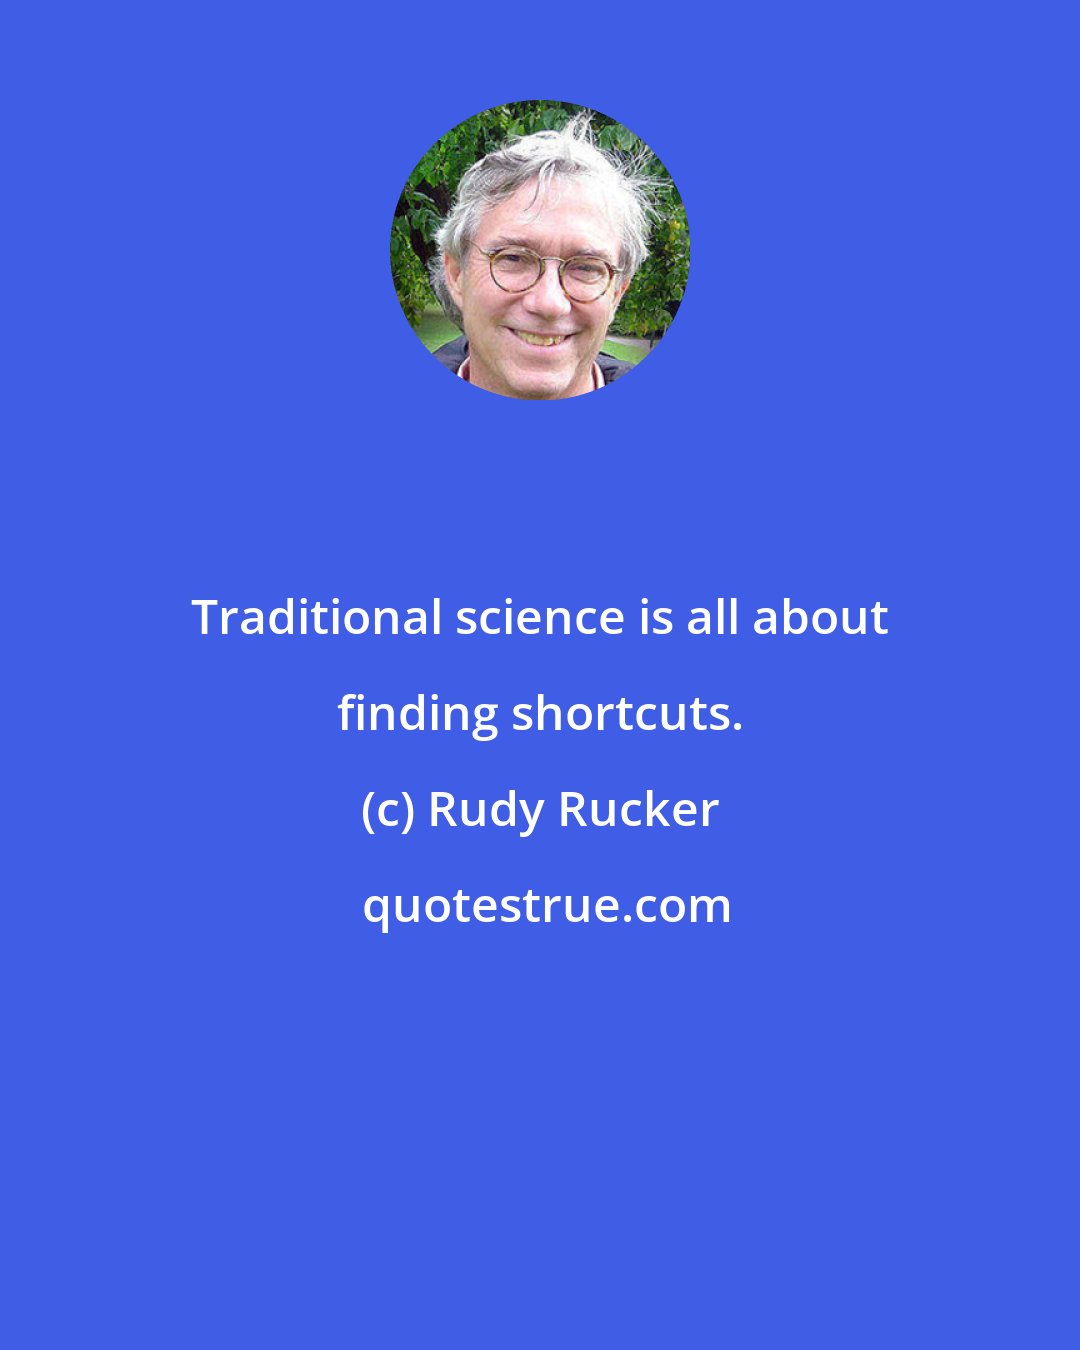 Rudy Rucker: Traditional science is all about finding shortcuts.